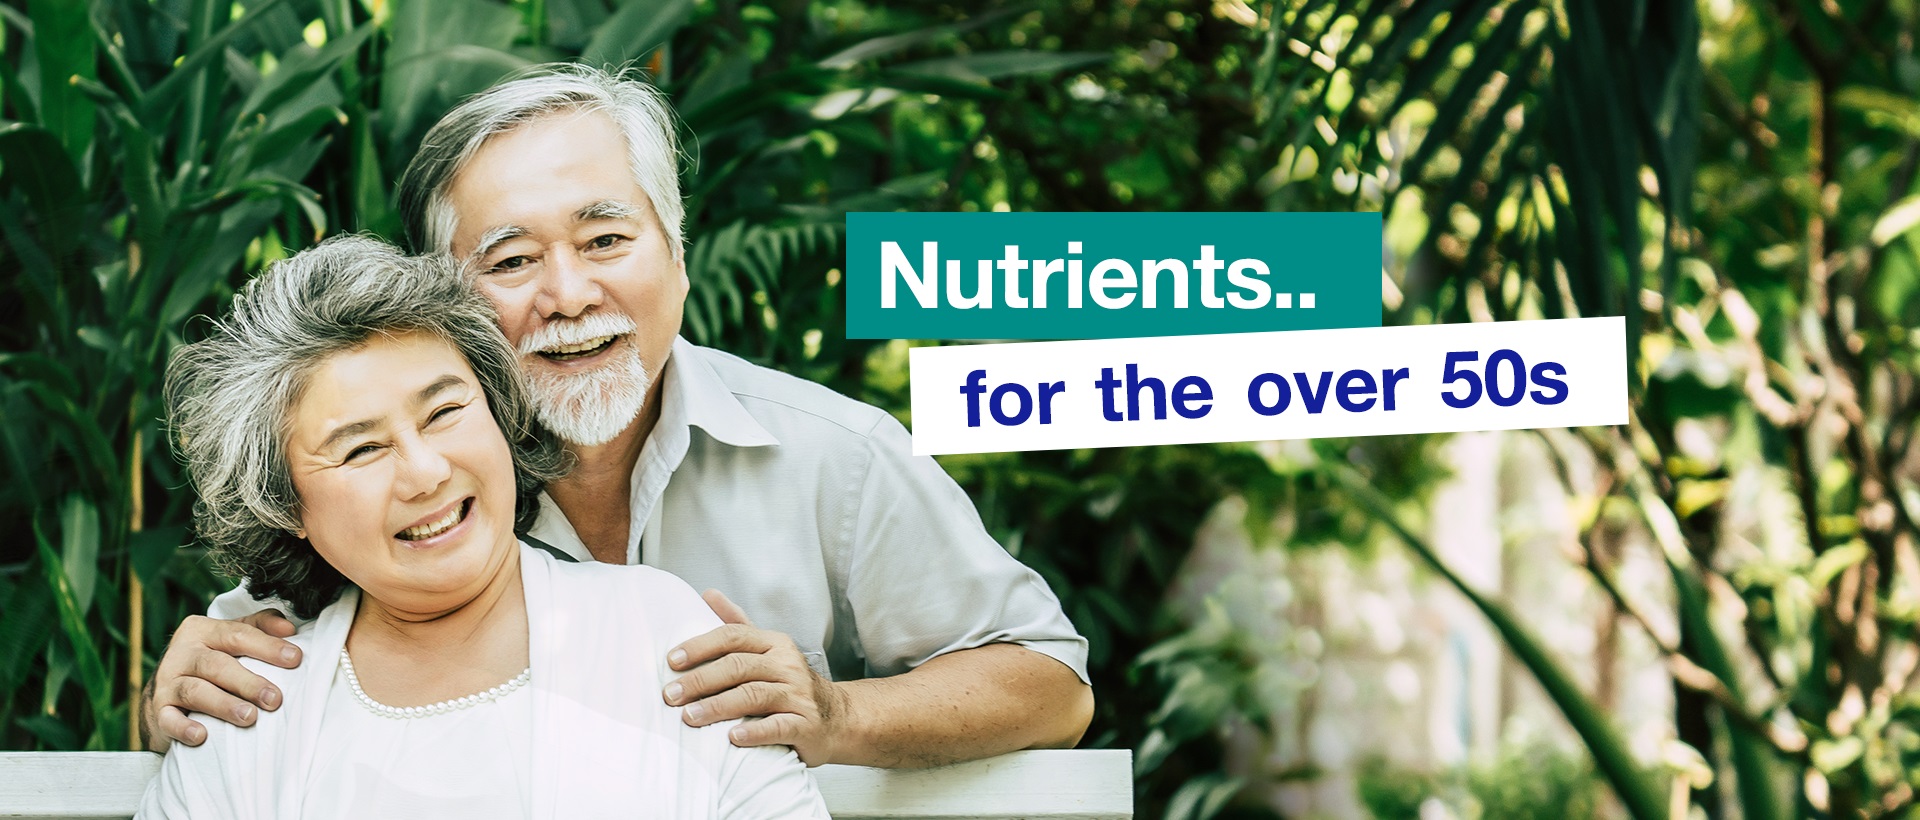 Nutrients for the over 50s